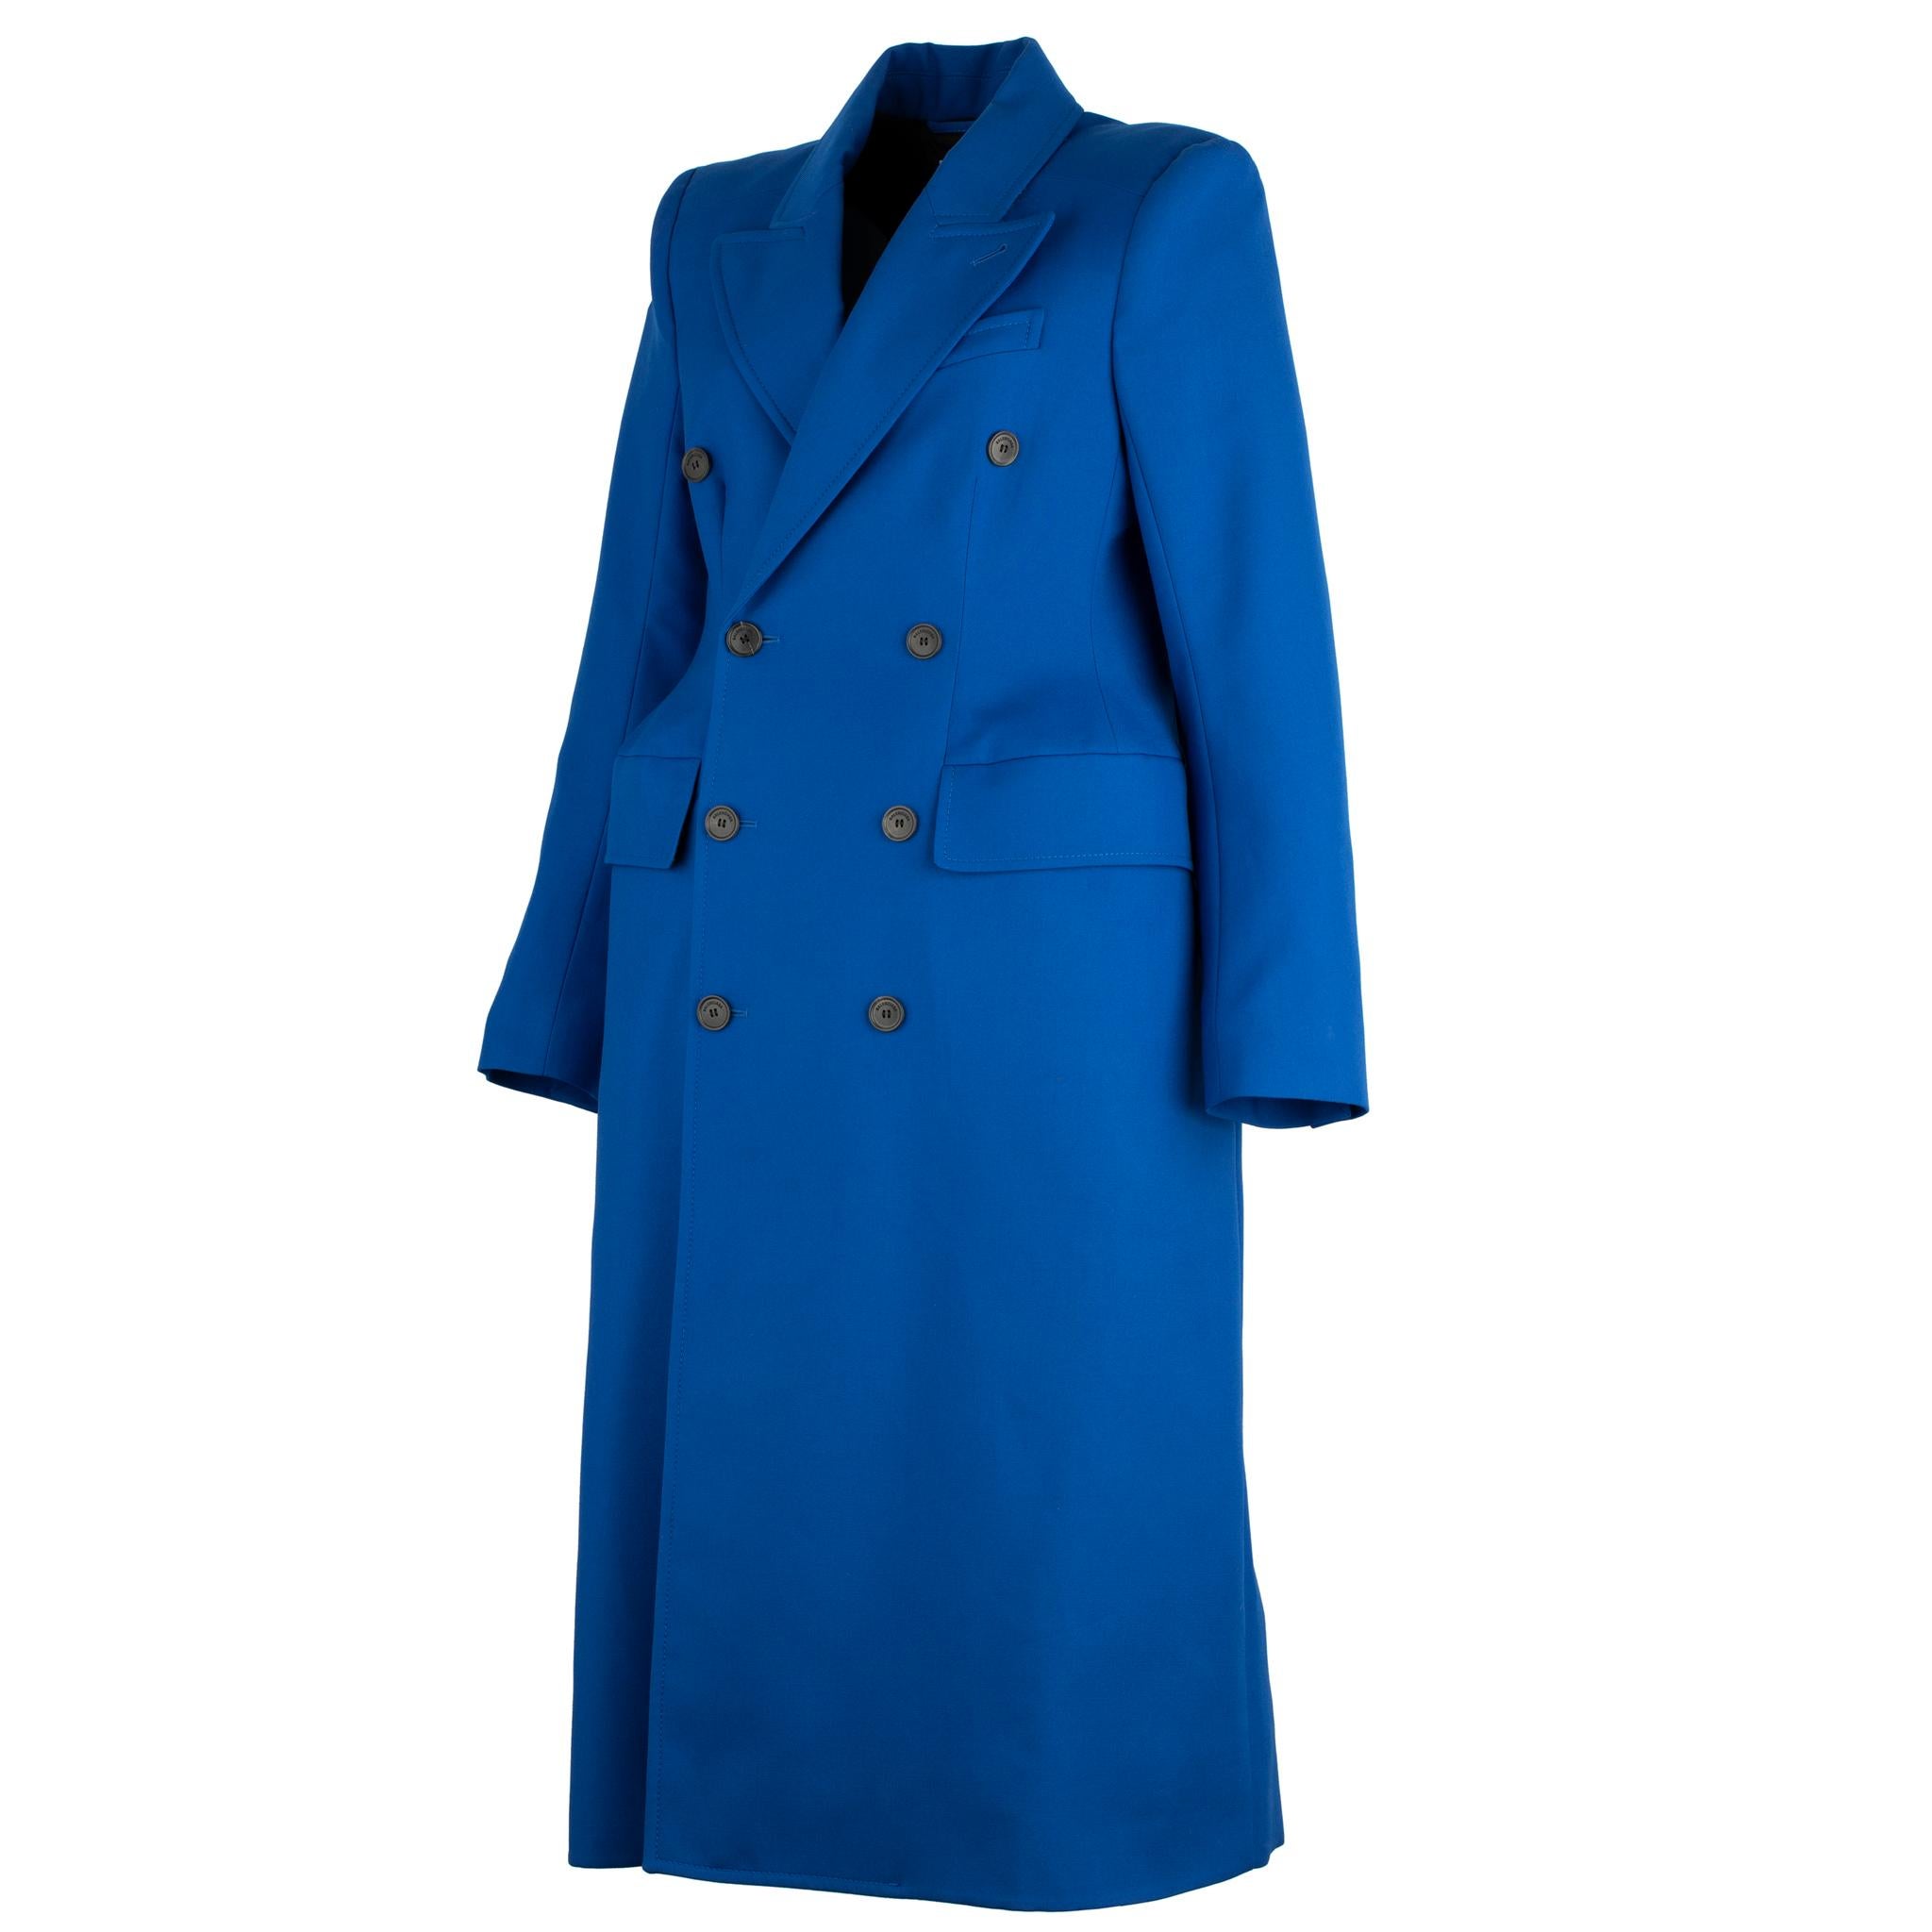 Balenciaga Hourglass Double Breasted Wool Blend Coat Royal Blue 38 FR In New Condition For Sale In DOUBLE BAY, NSW